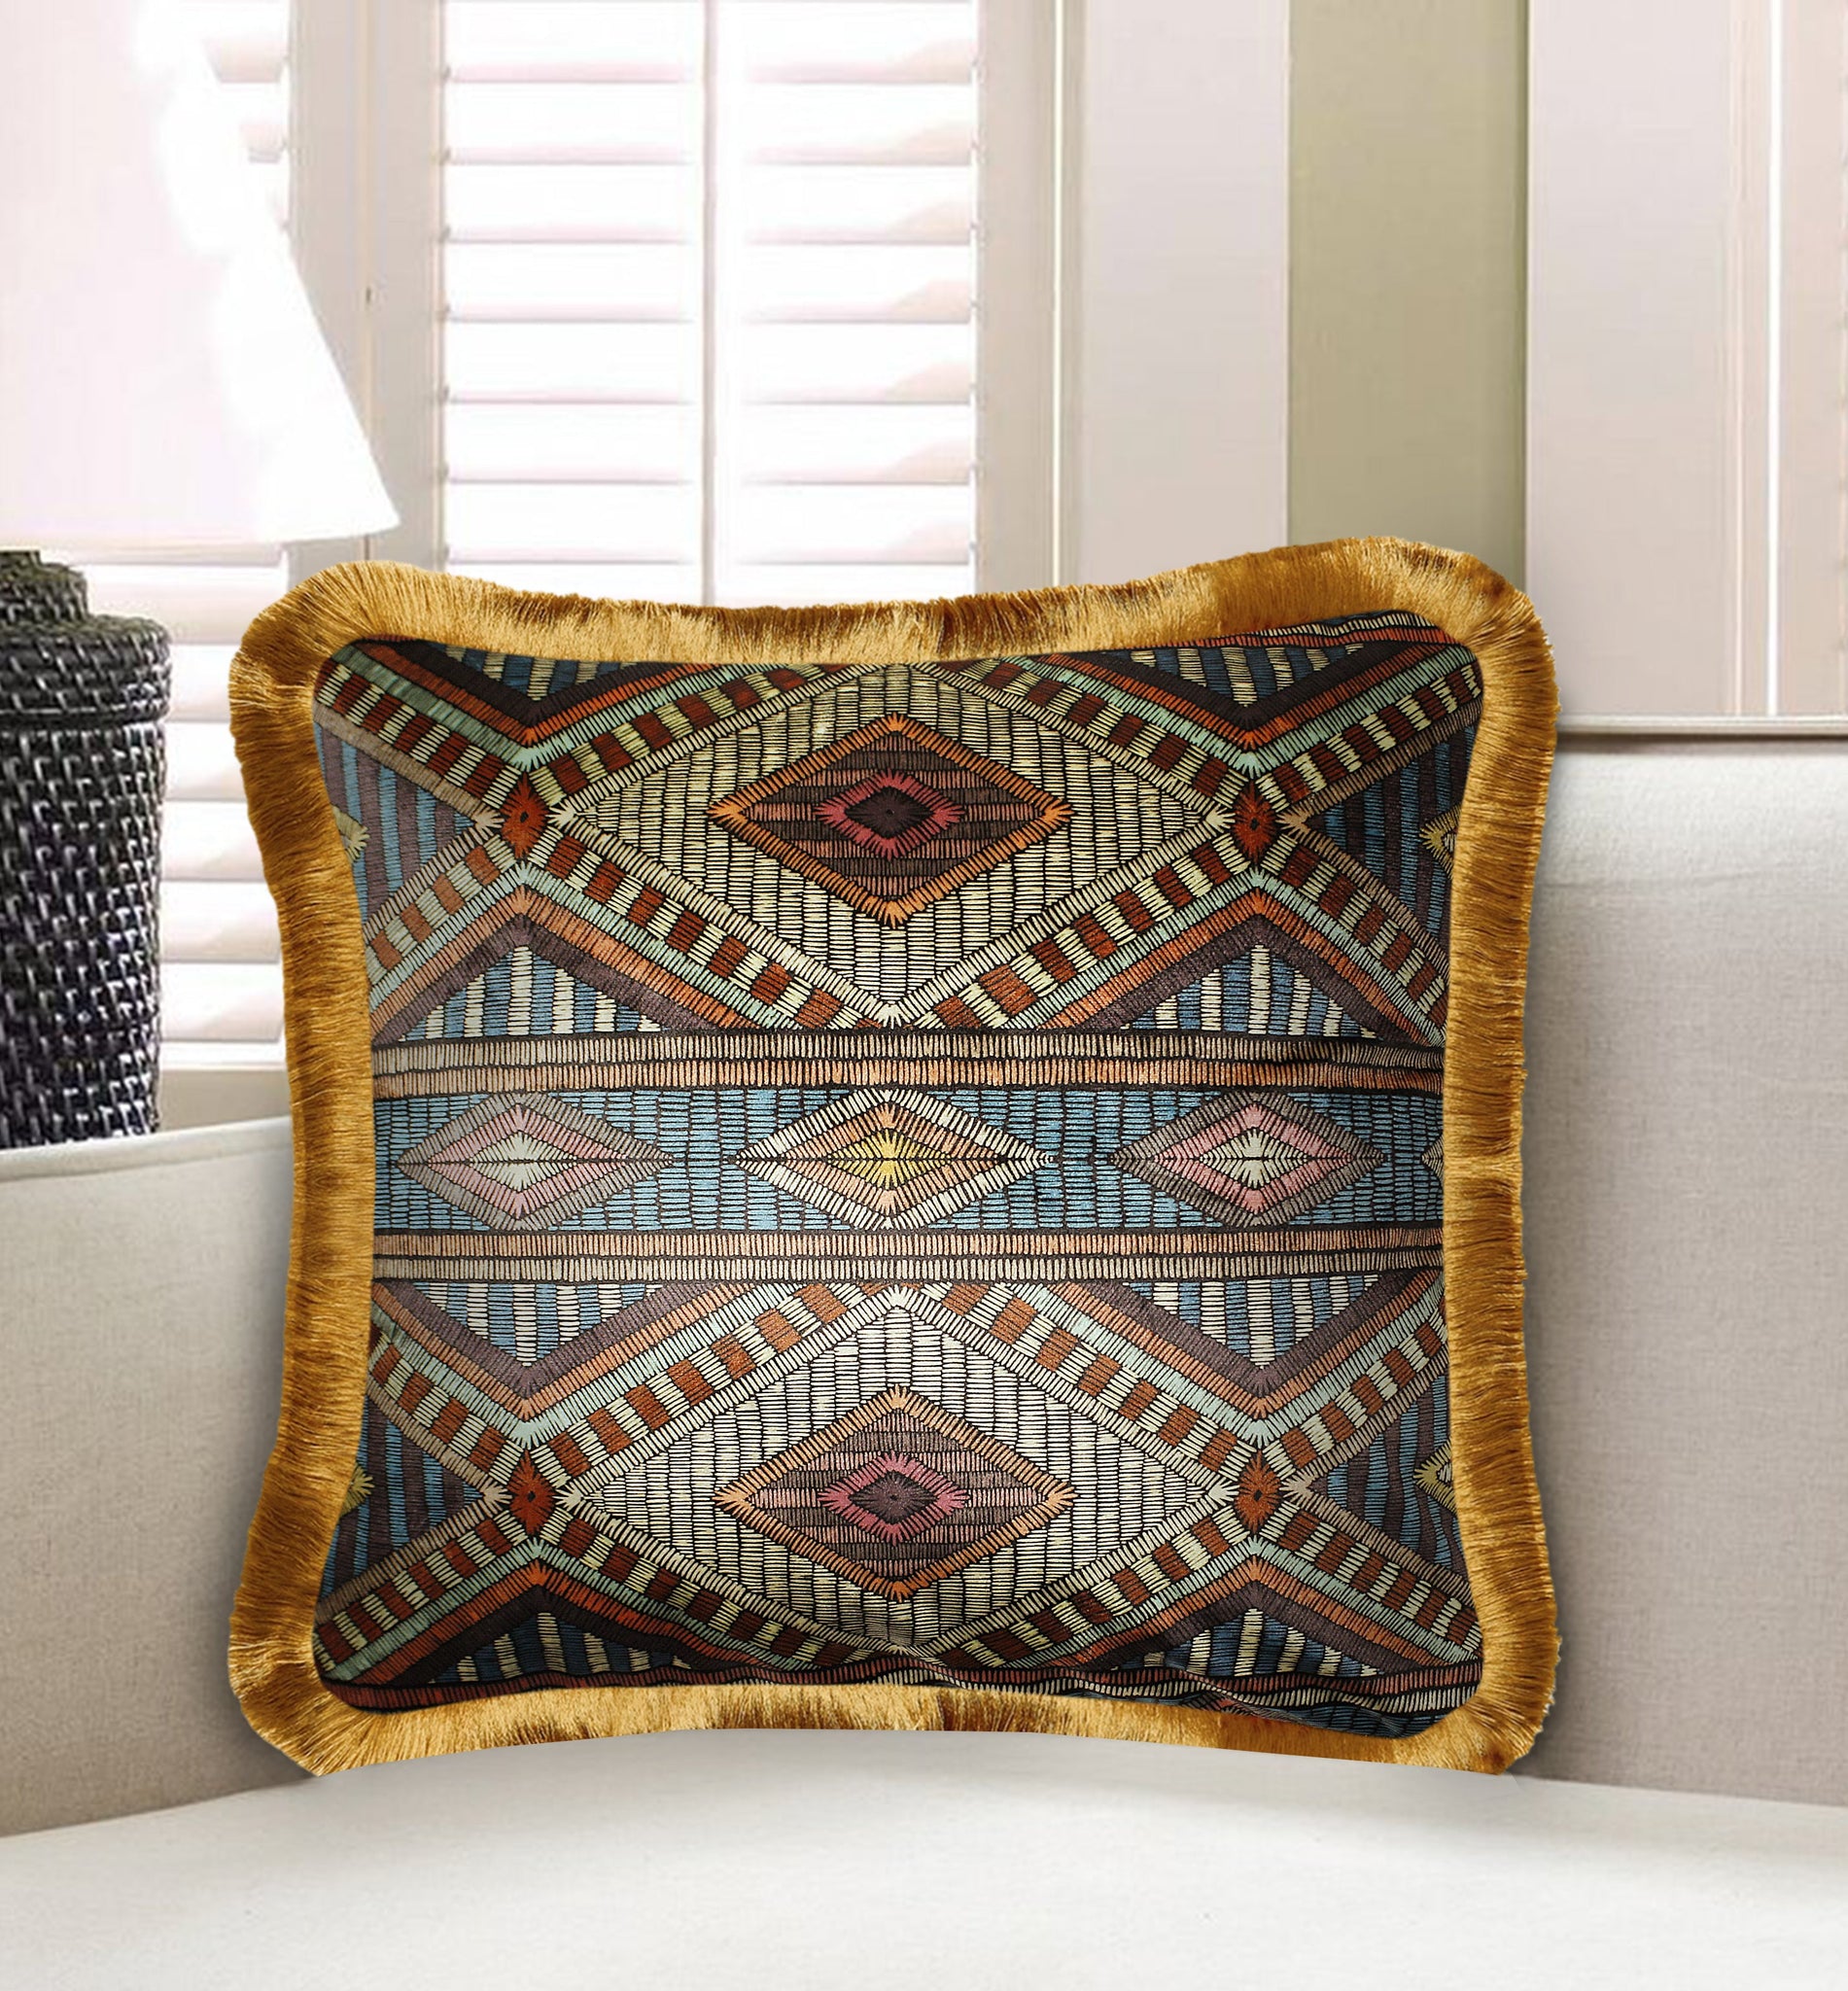 Brown Velvet Cushion Cover Aztec Geometric Decorative Pillow Cover Home Decor Throw Pillow for Sofa Chair Couch Bedroom 45x45 cm 18x18 In